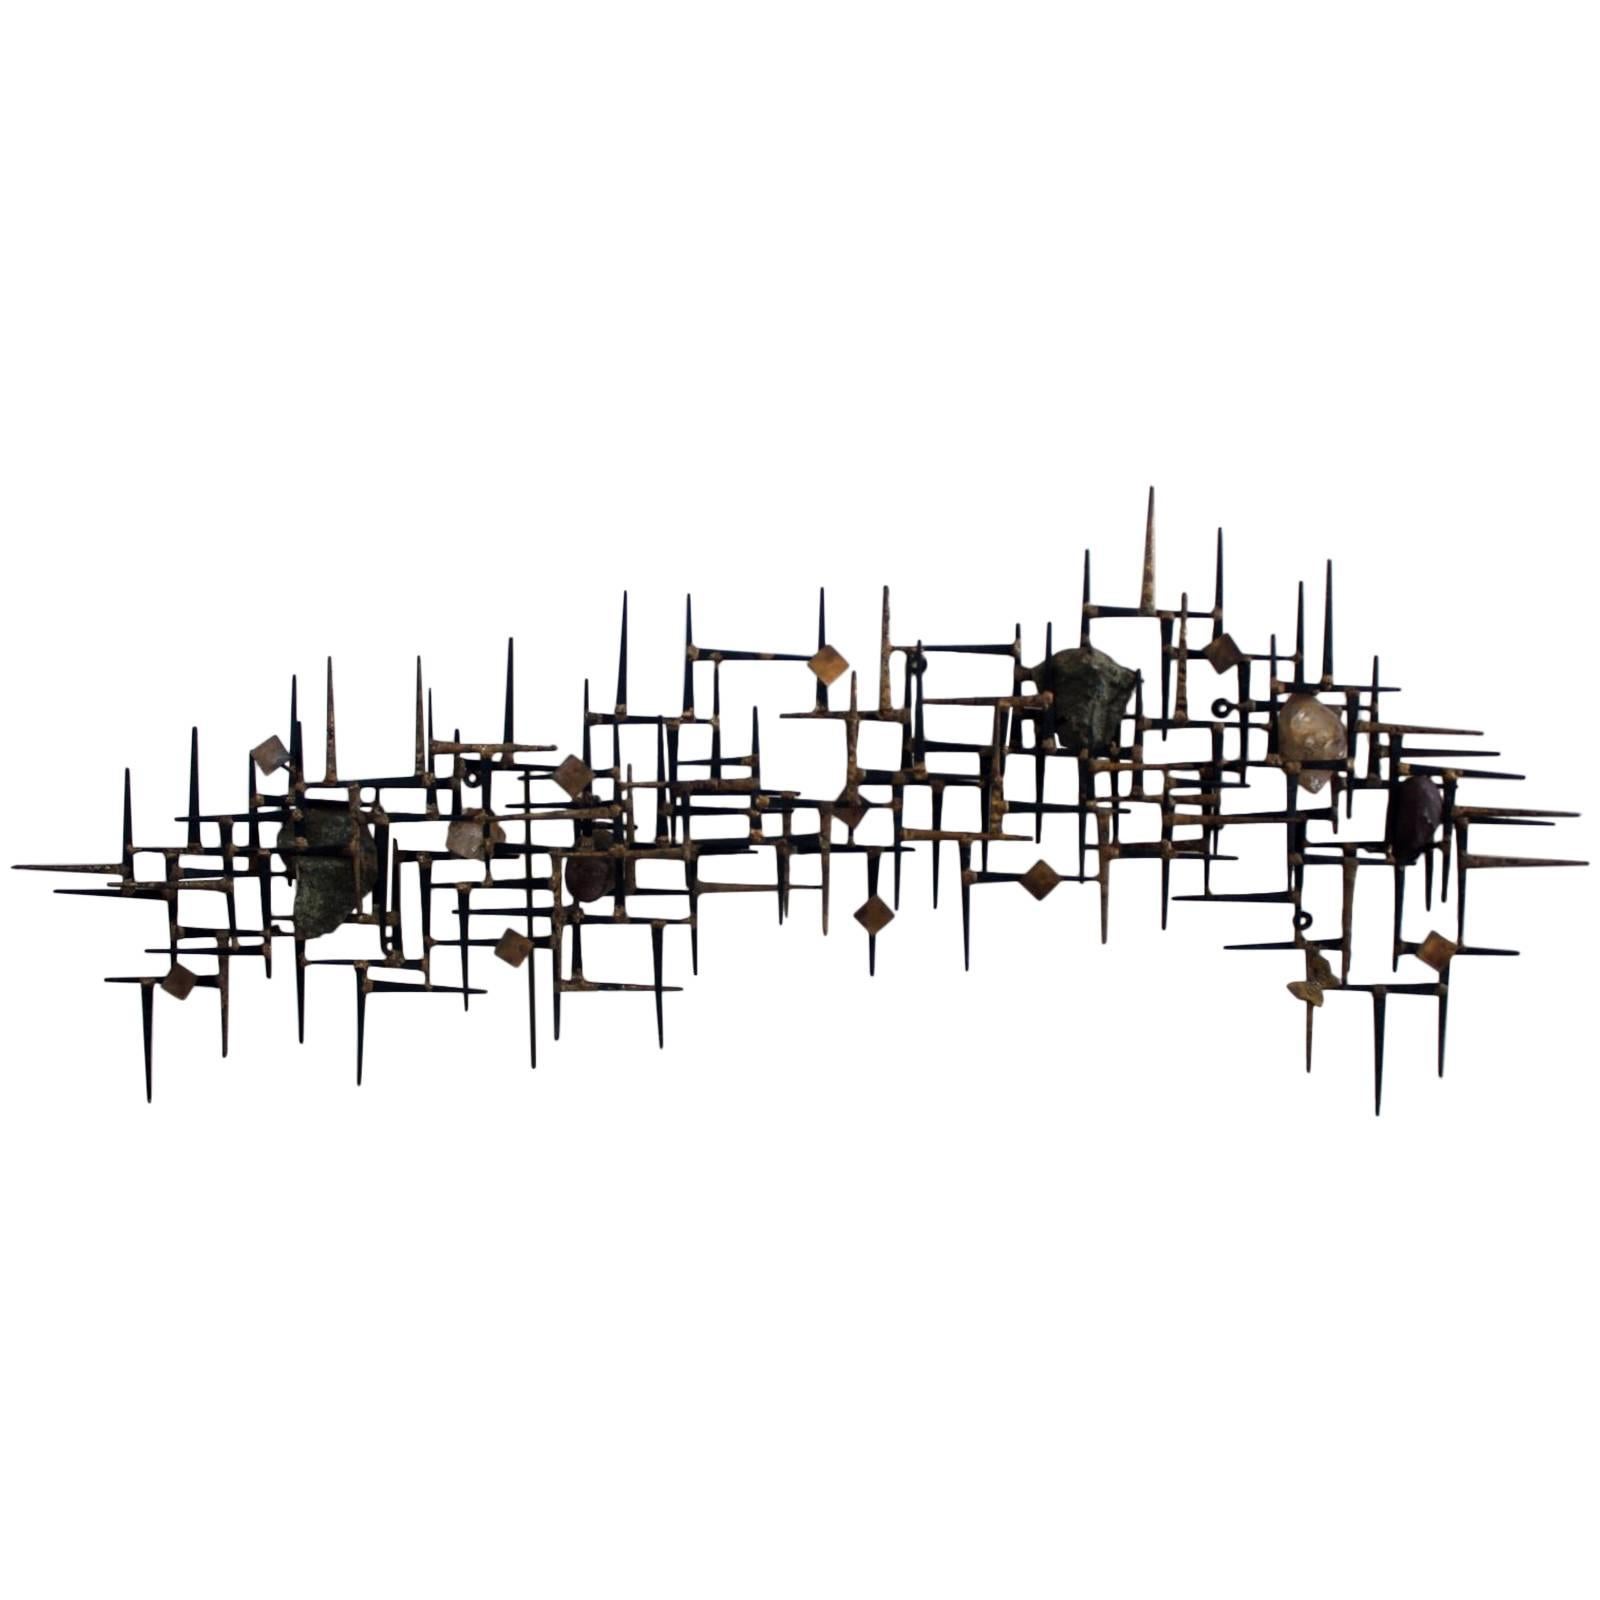 Brutalist Abstract Wall Mount Sculpture with Quartz Pieces by Jim Gary